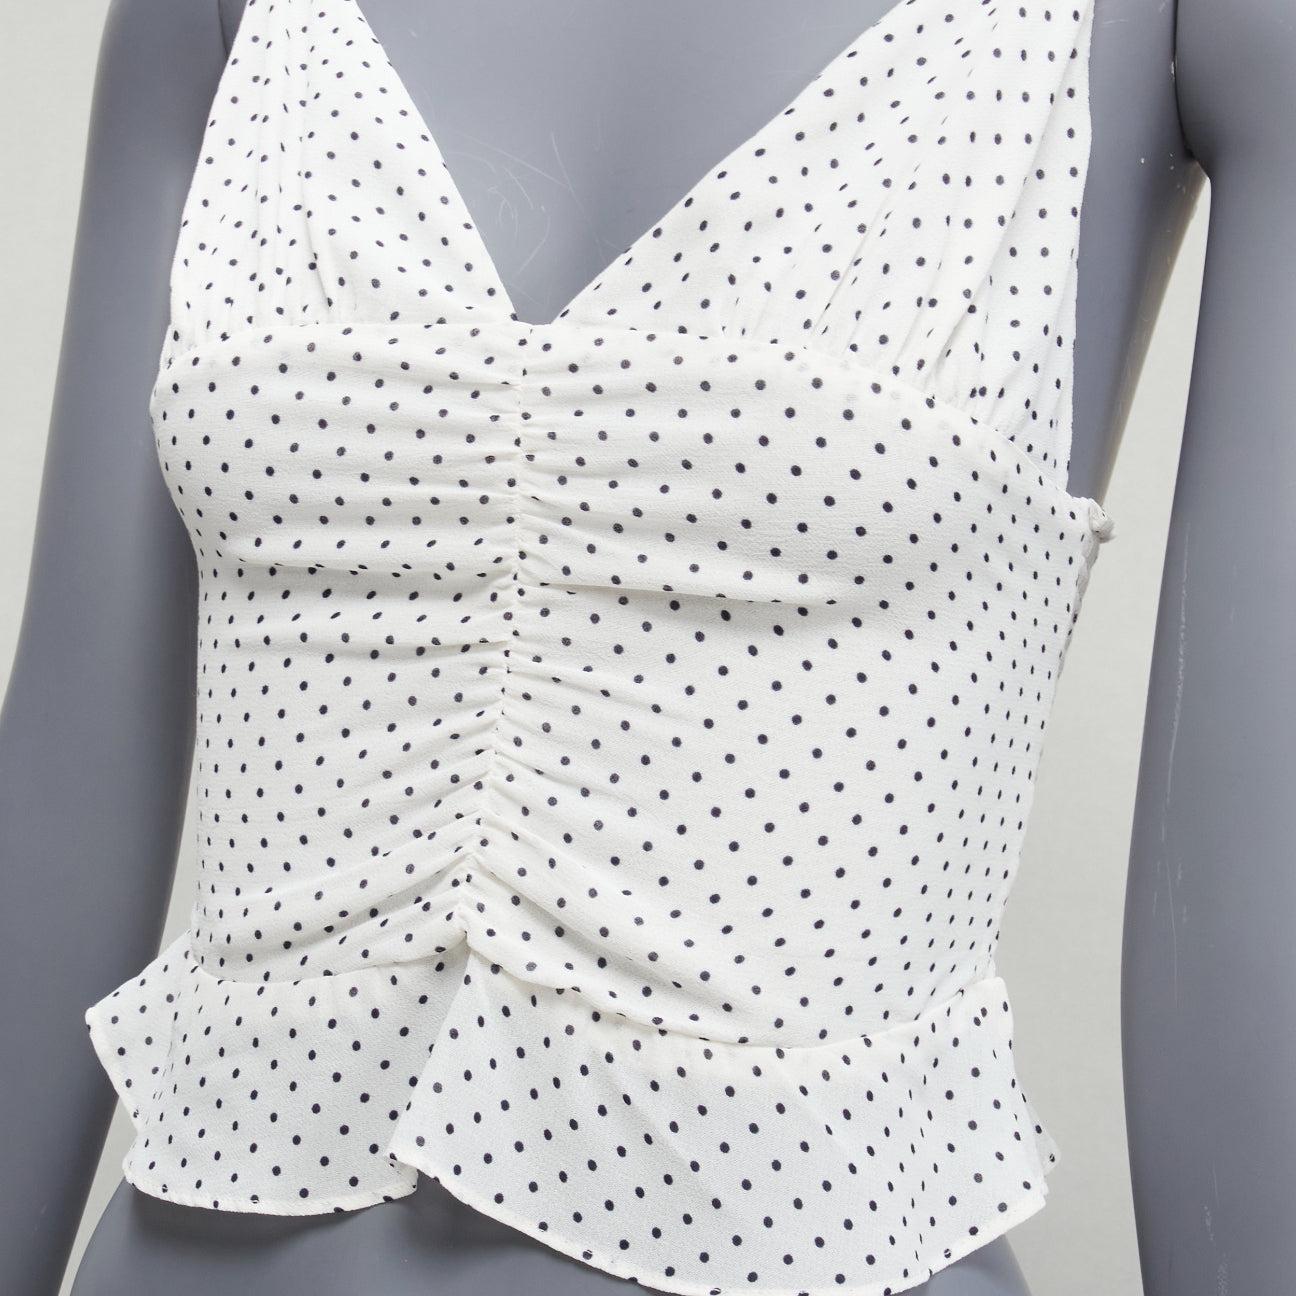 REFORMATION Hall white polka dot V neck retro ruched tank top US0 XS
Reference: SNKO/A00396
Brand: Reformation
Model: Hall
Material: Viscose
Color: White, Black
Pattern: Polka Dot
Closure: Zip
Lining: White Fabric
Extra Details: Elasticated back